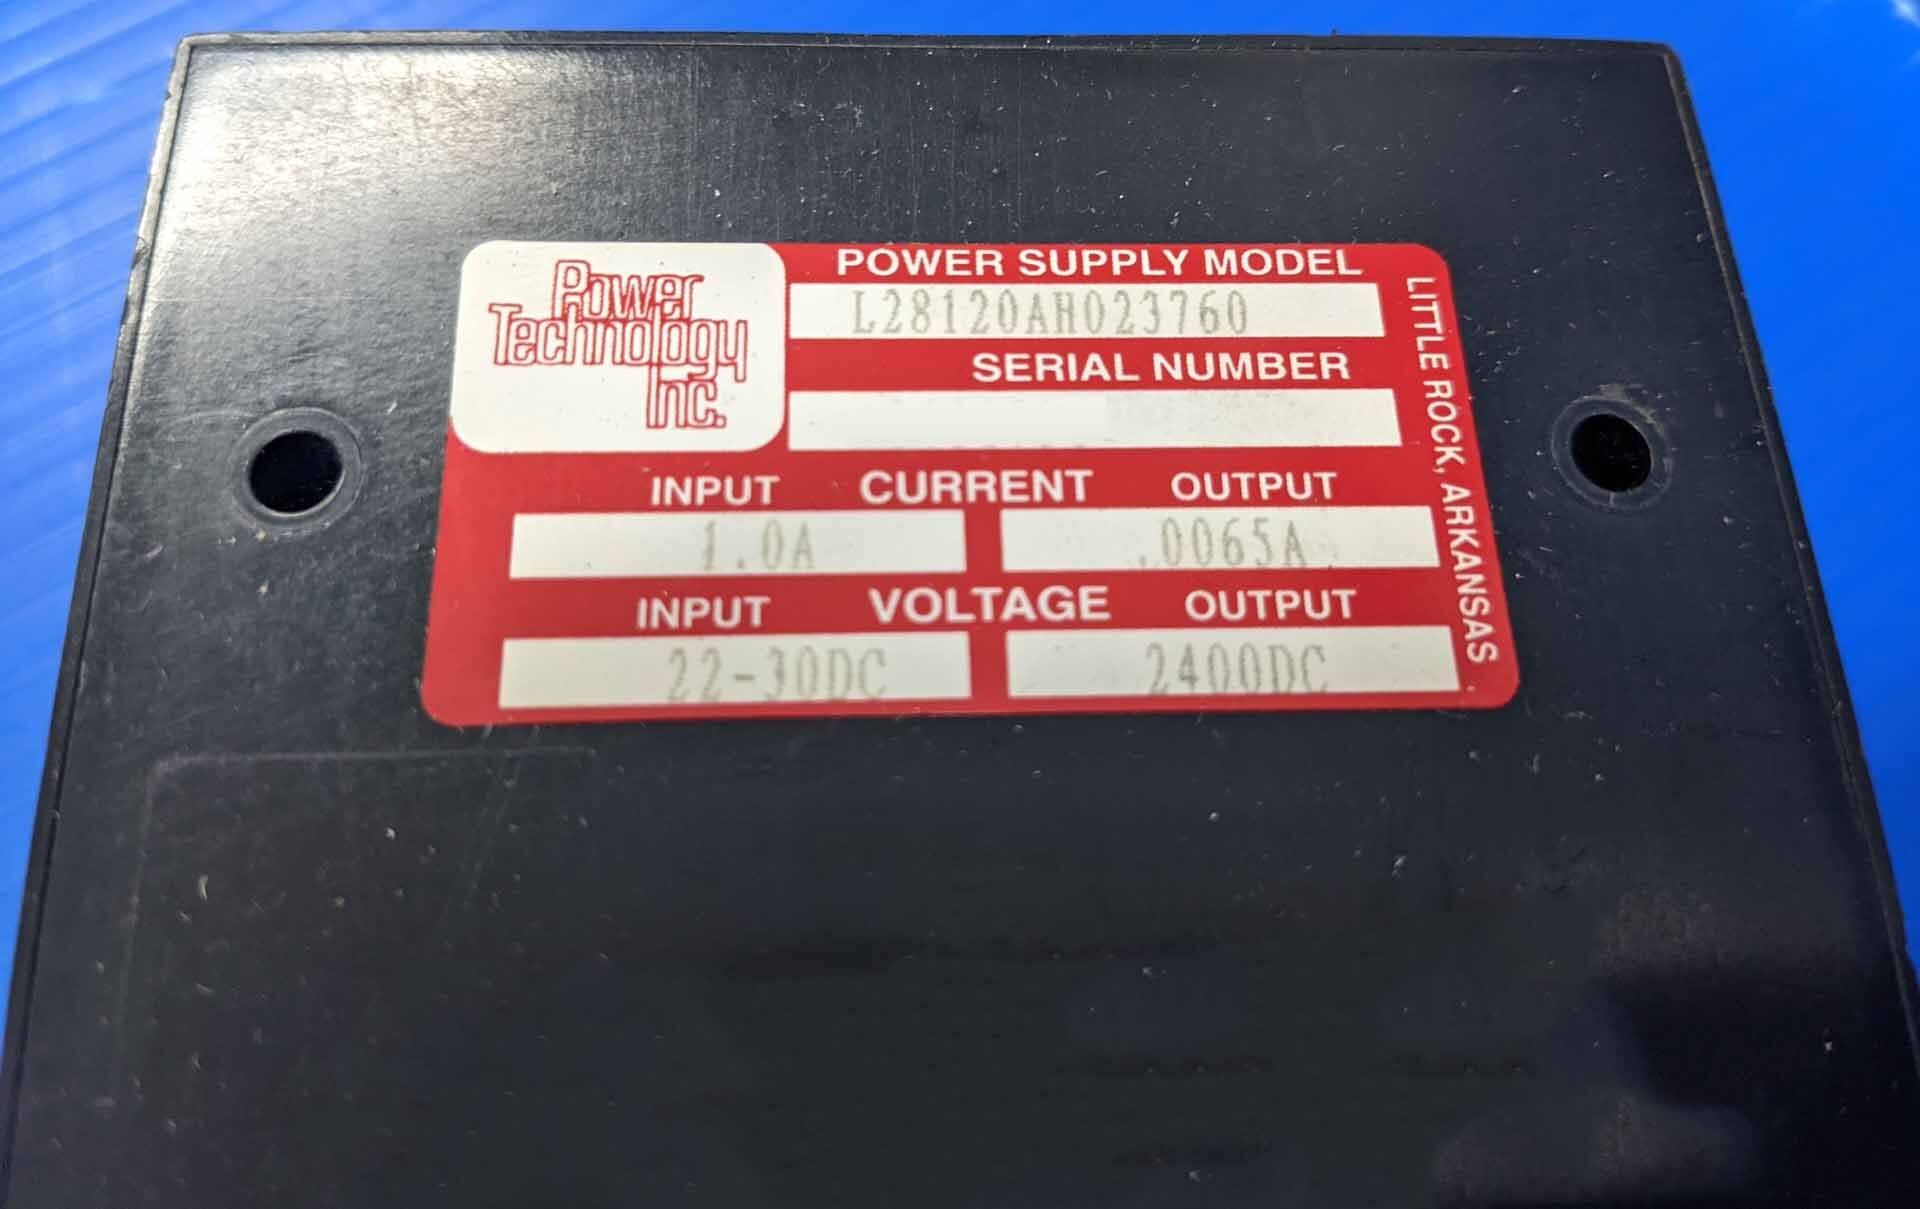 Photo Used POWER TECHNOLOGY L28120AH023760 For Sale